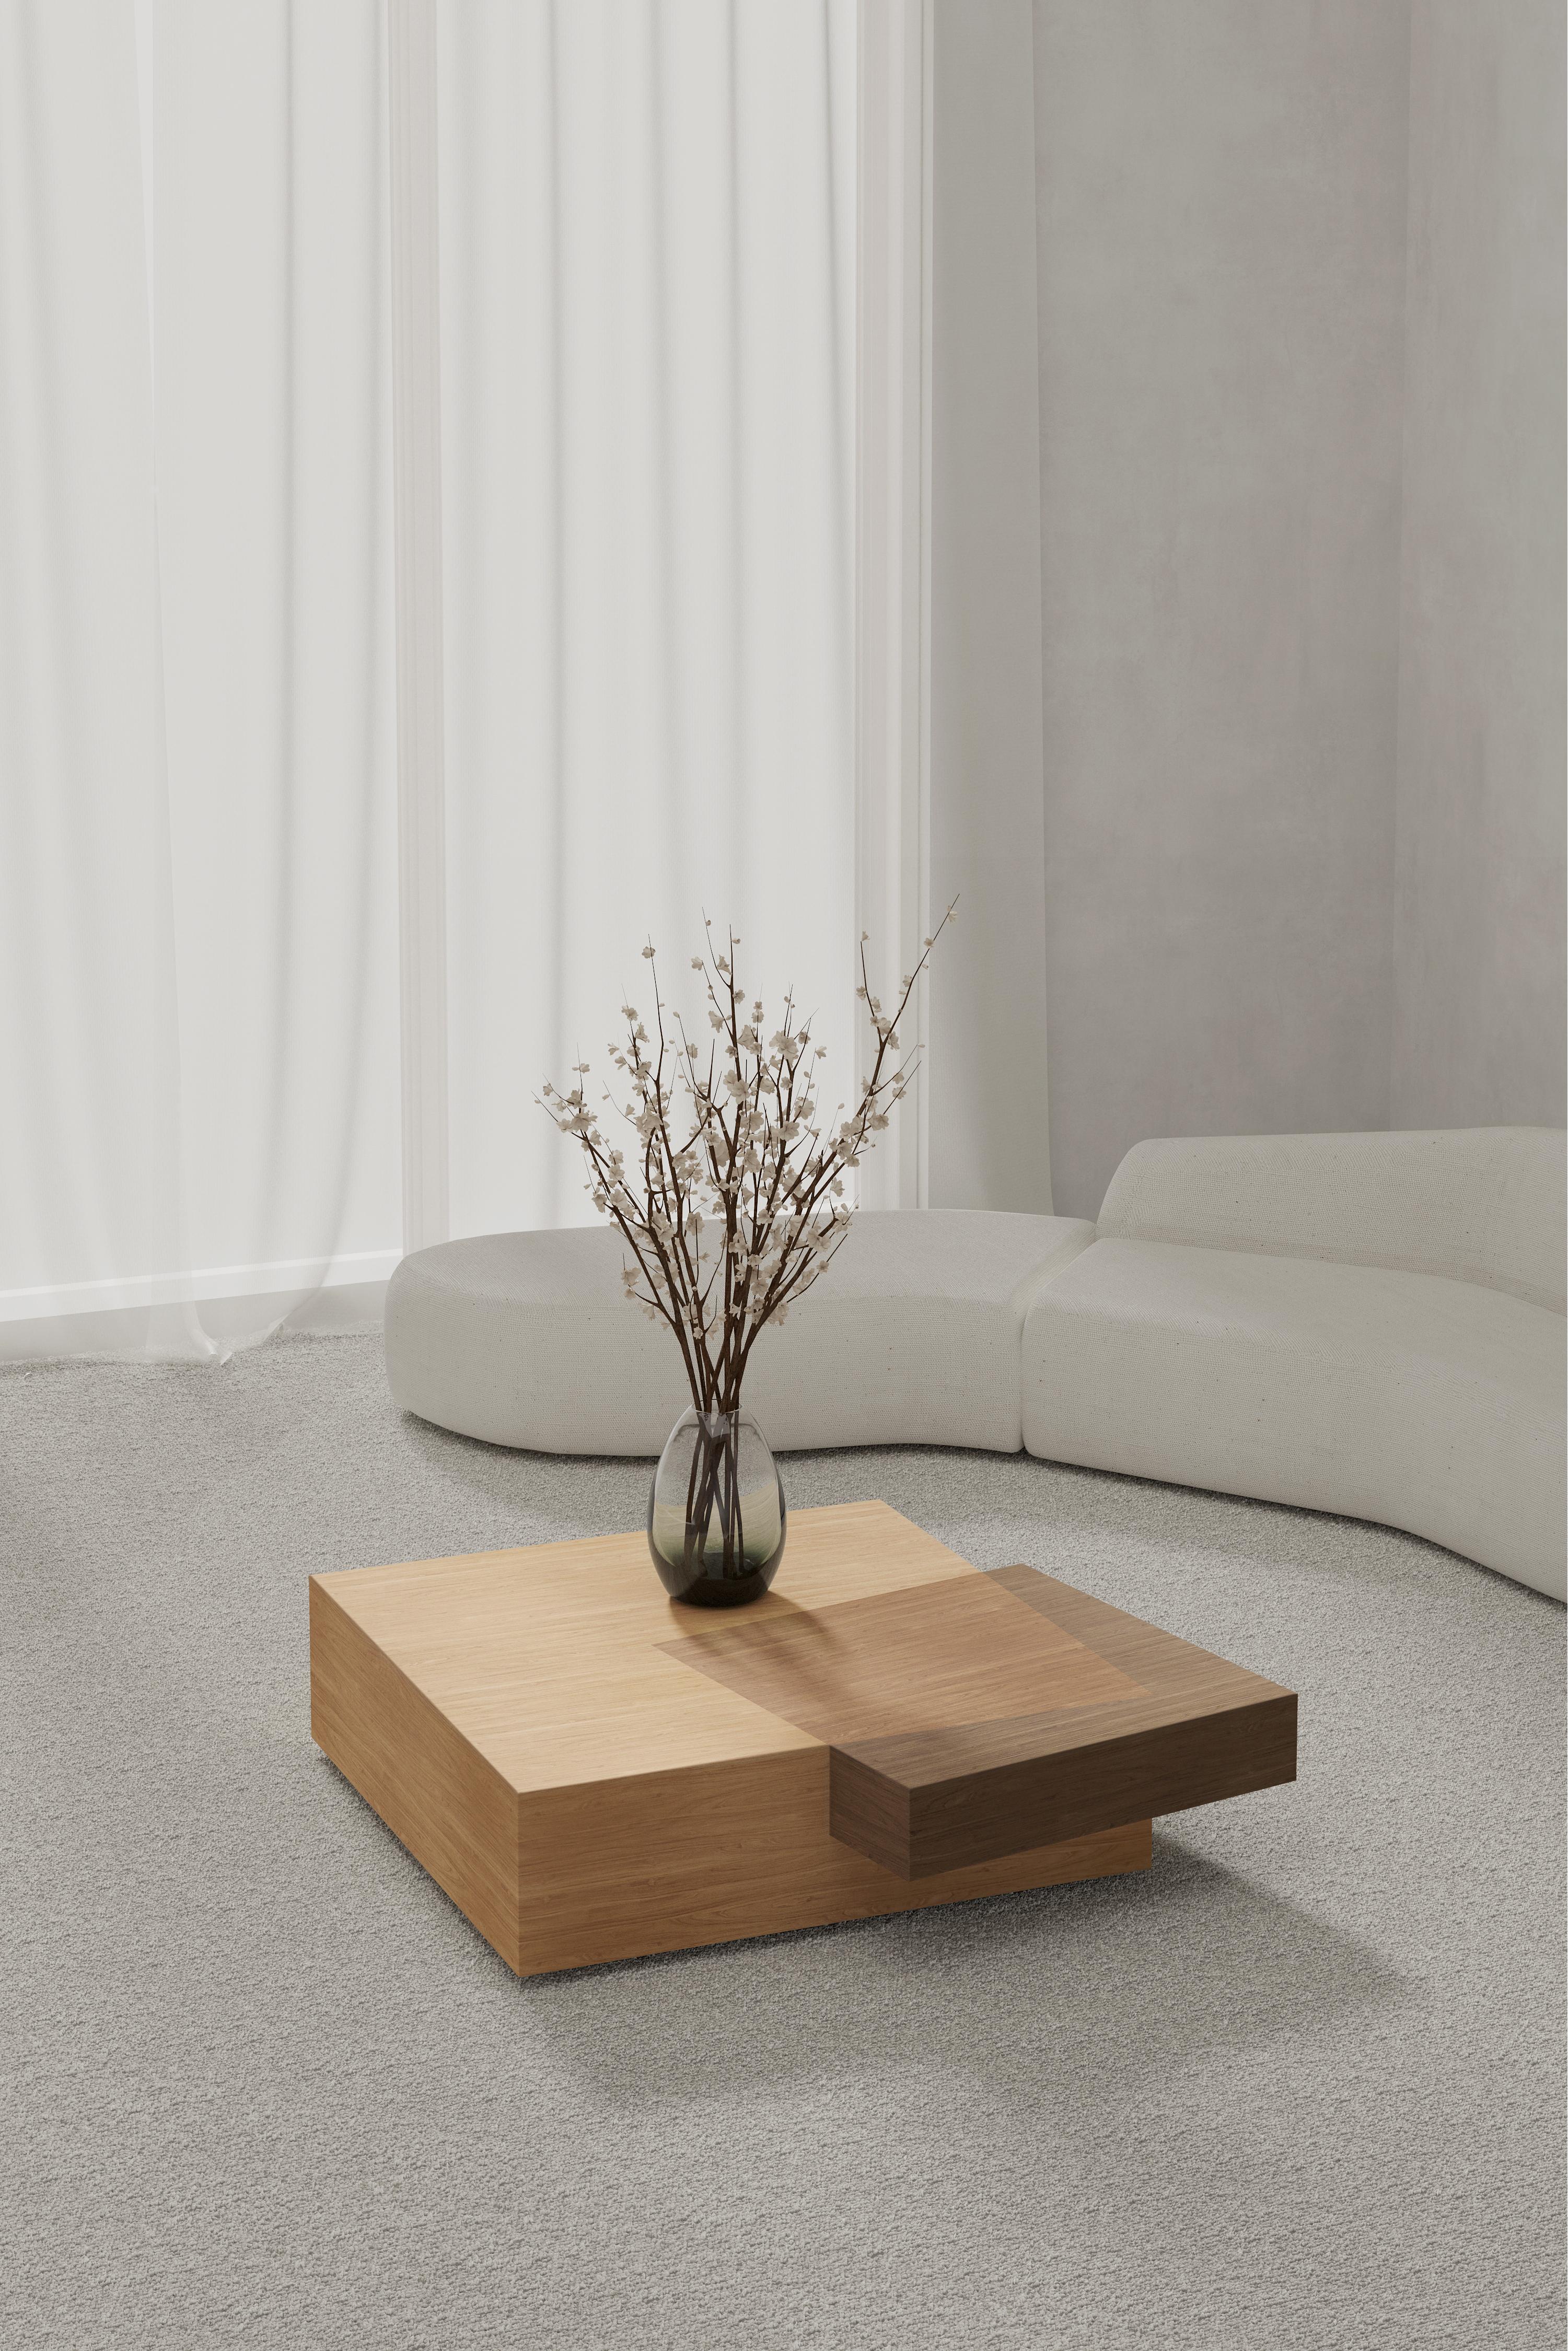 Booleanos collection reflects the concept of involuntary interactions and unexpected intersections. 

This geometric coffee table designed by Joel Escalona is a visual game that captivates the eye for its symmetry and the defying balance of its